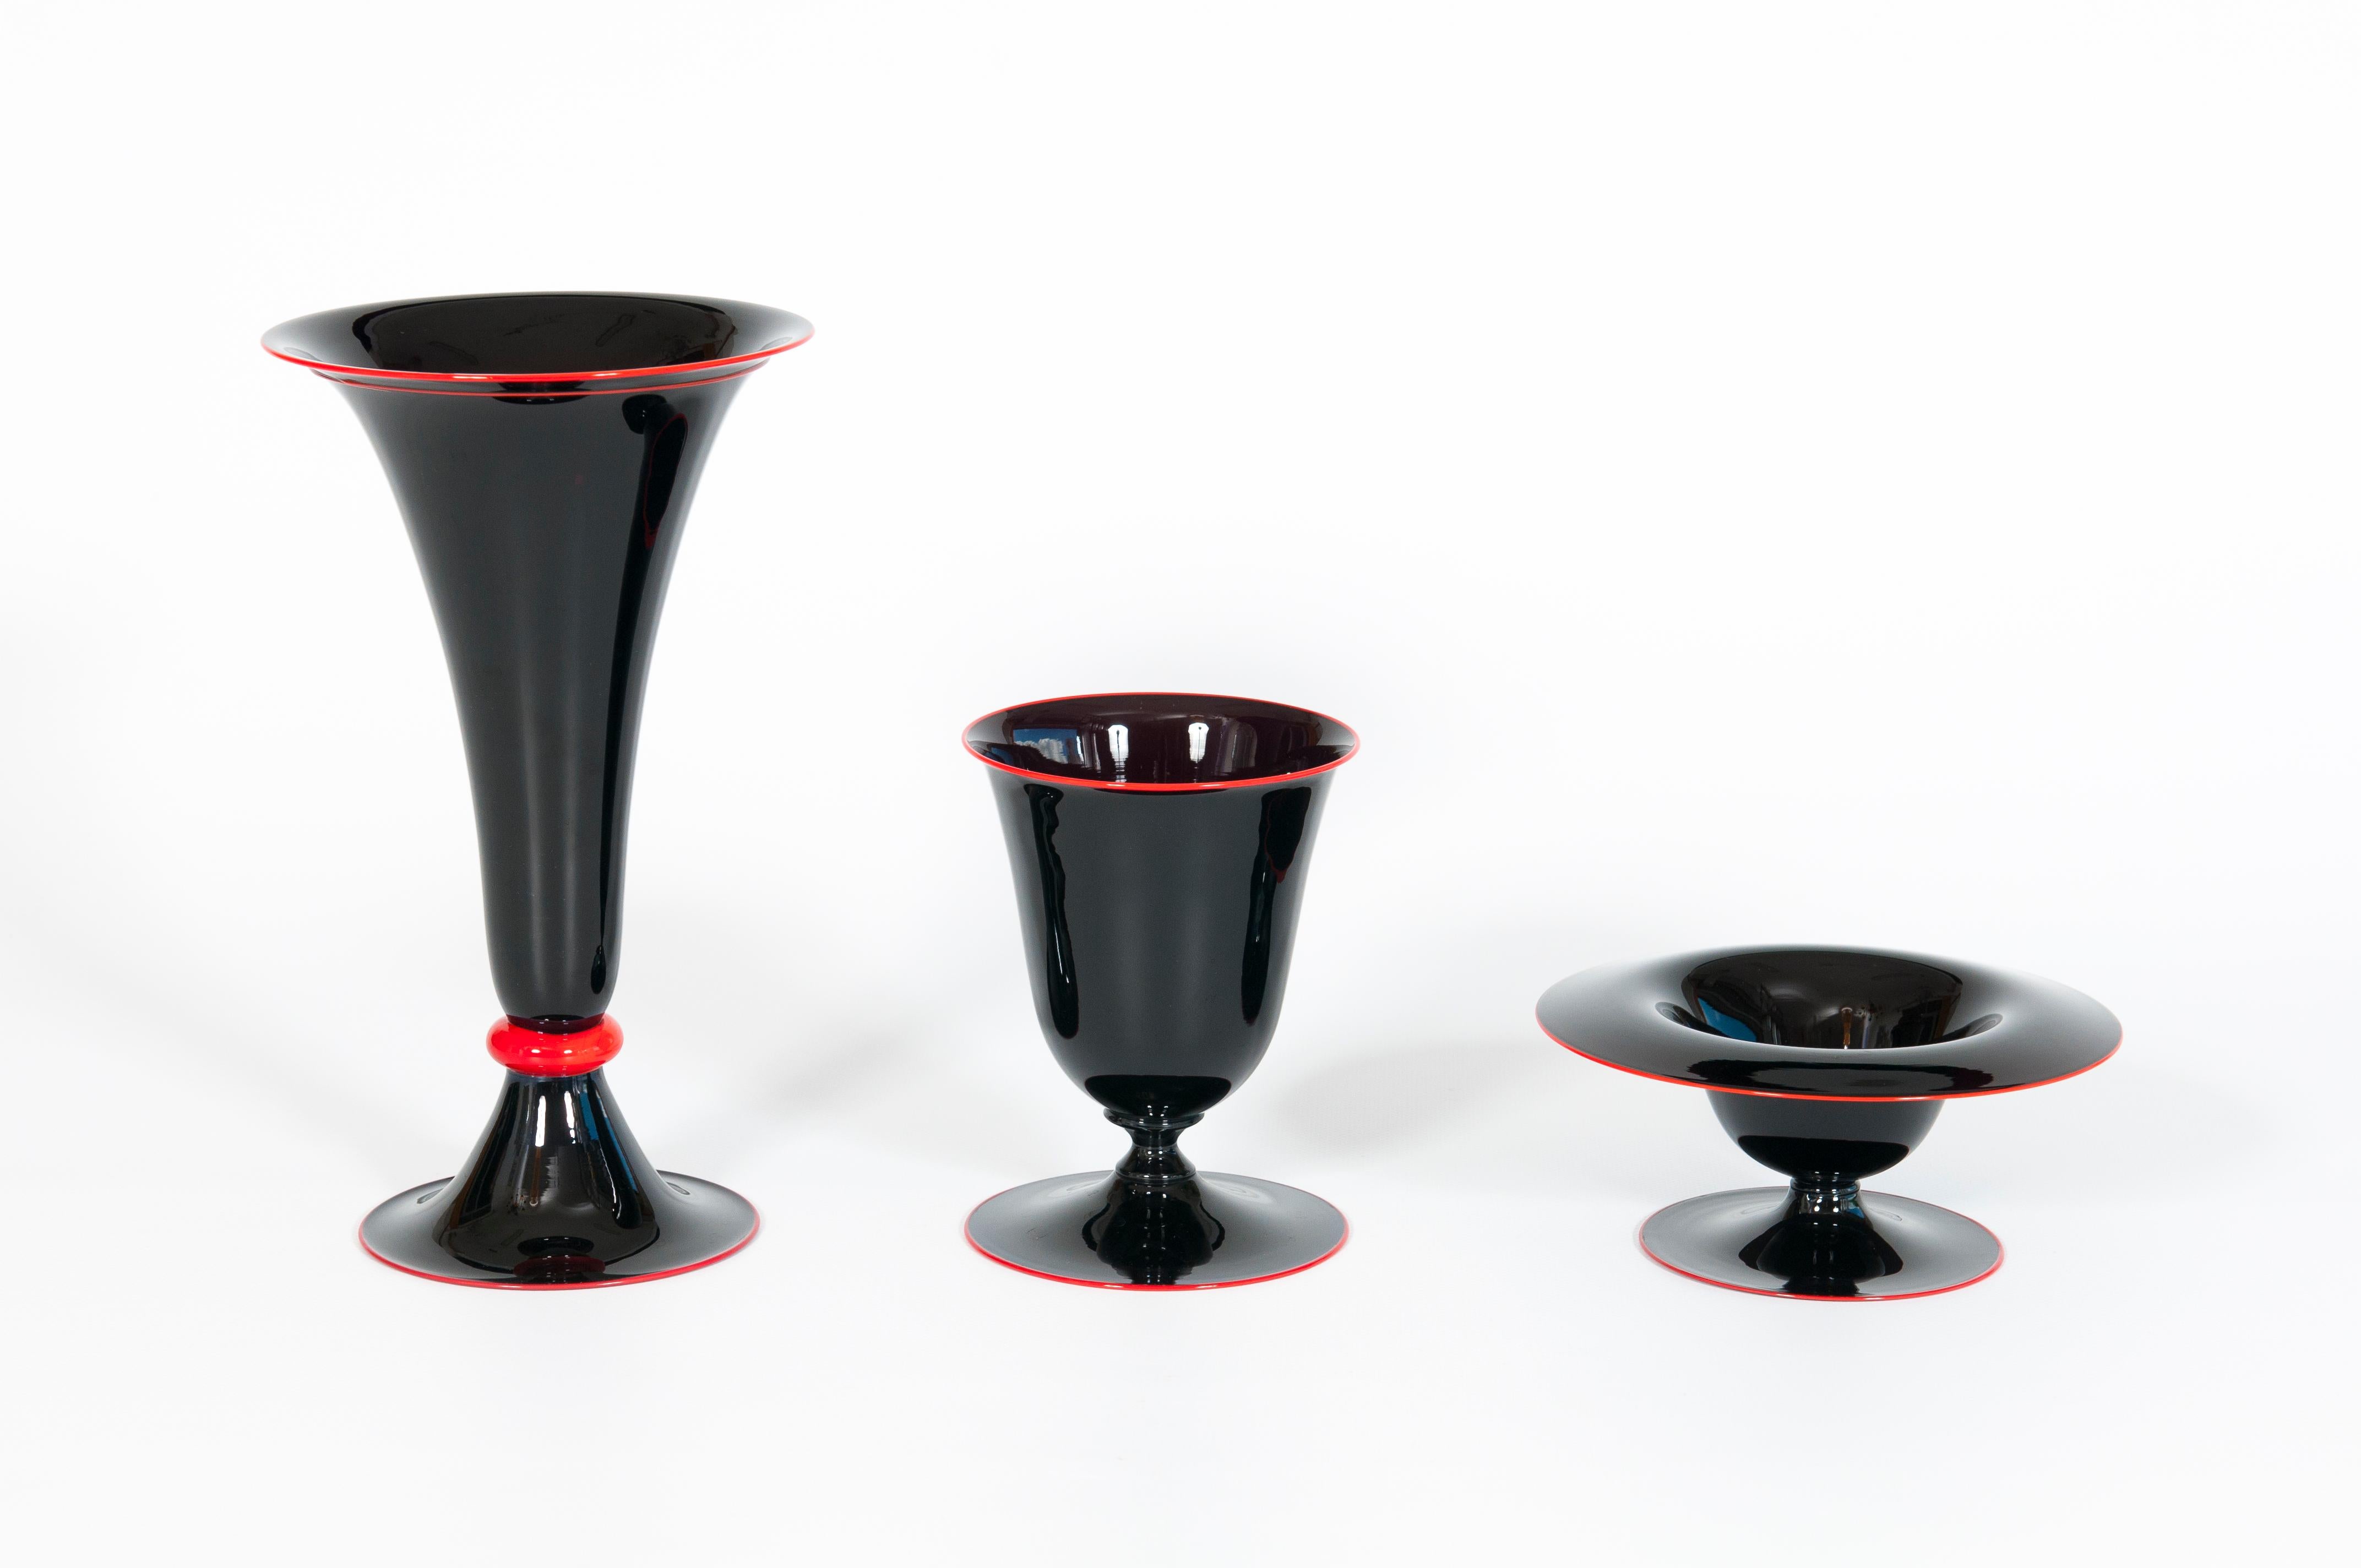 Trio of Shiny Black Stem Glasses in Murano Glass with Red Finishes Italy 1970s
Entirely handmade of blown Murano glass in the 1970s, this original trio of stem glasses stands out for its polished design and the intriguing colour. In style of the